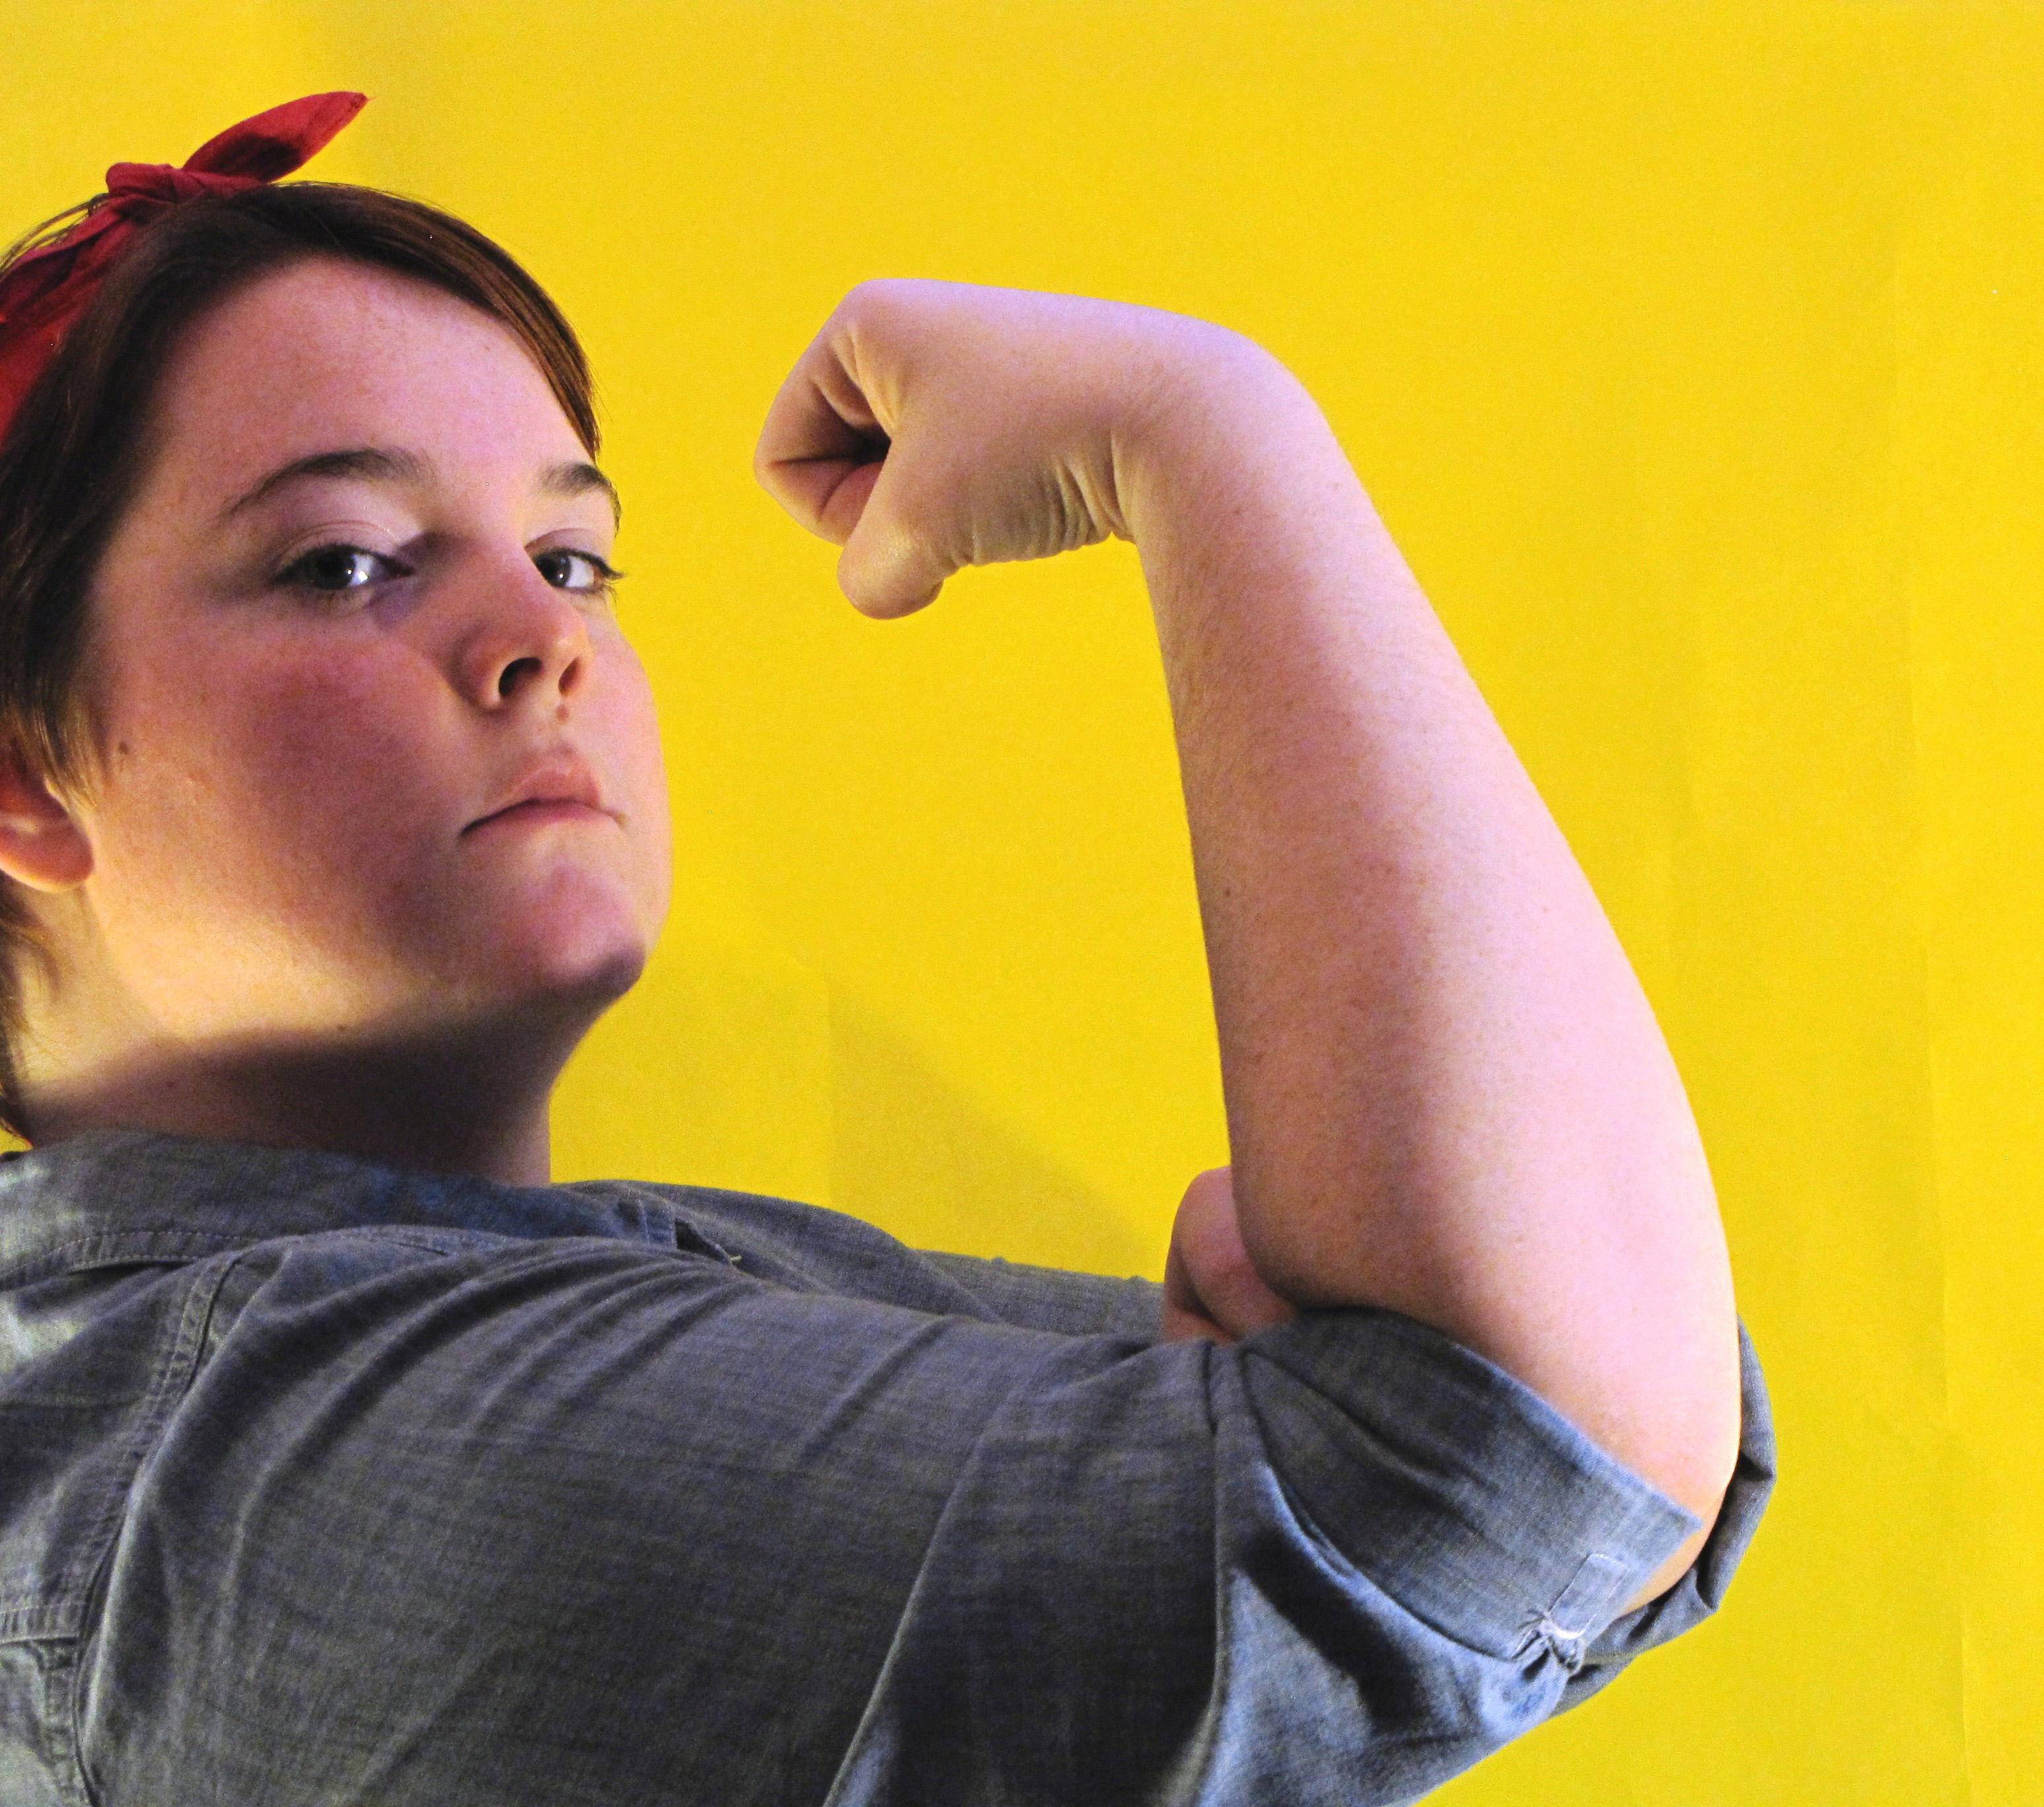 A female student photographed as Rosie the Riveter